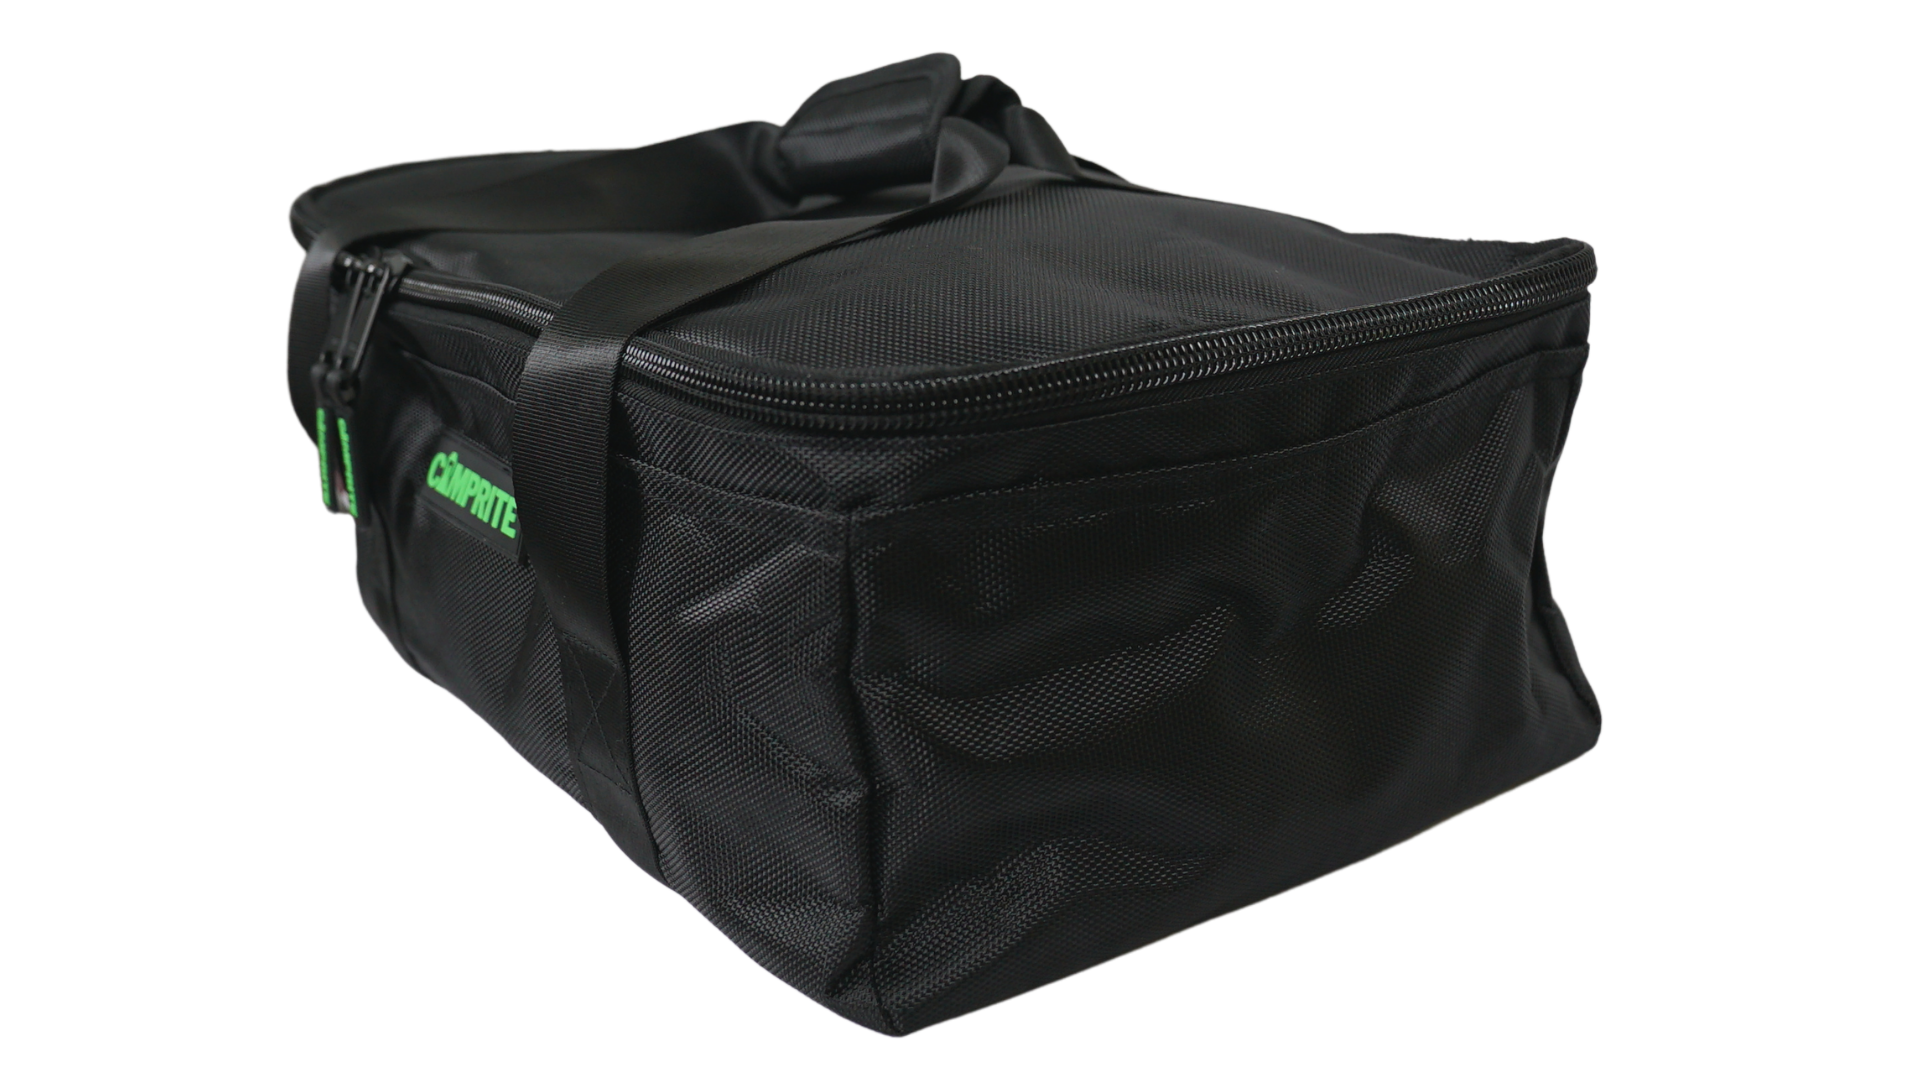 Storage Bag for Pegs and Ropes